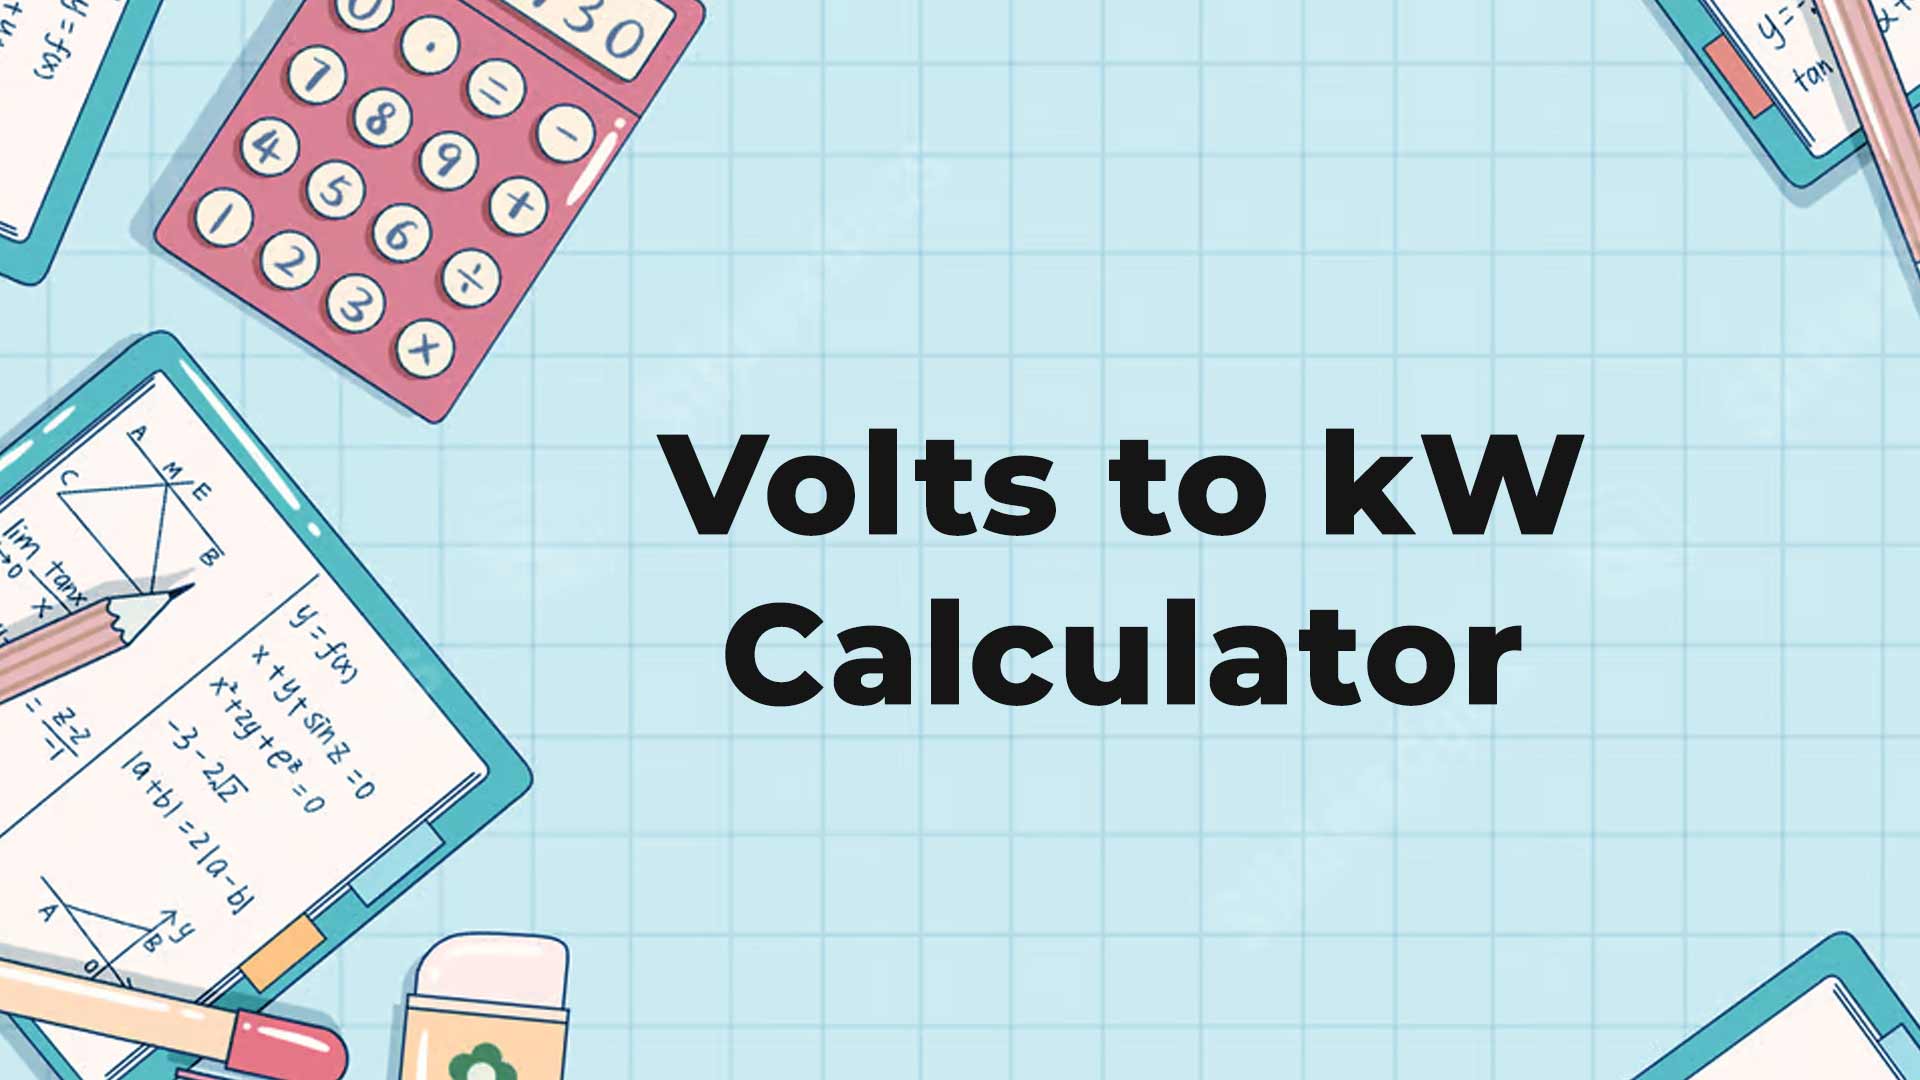 Volts to kW Calculator